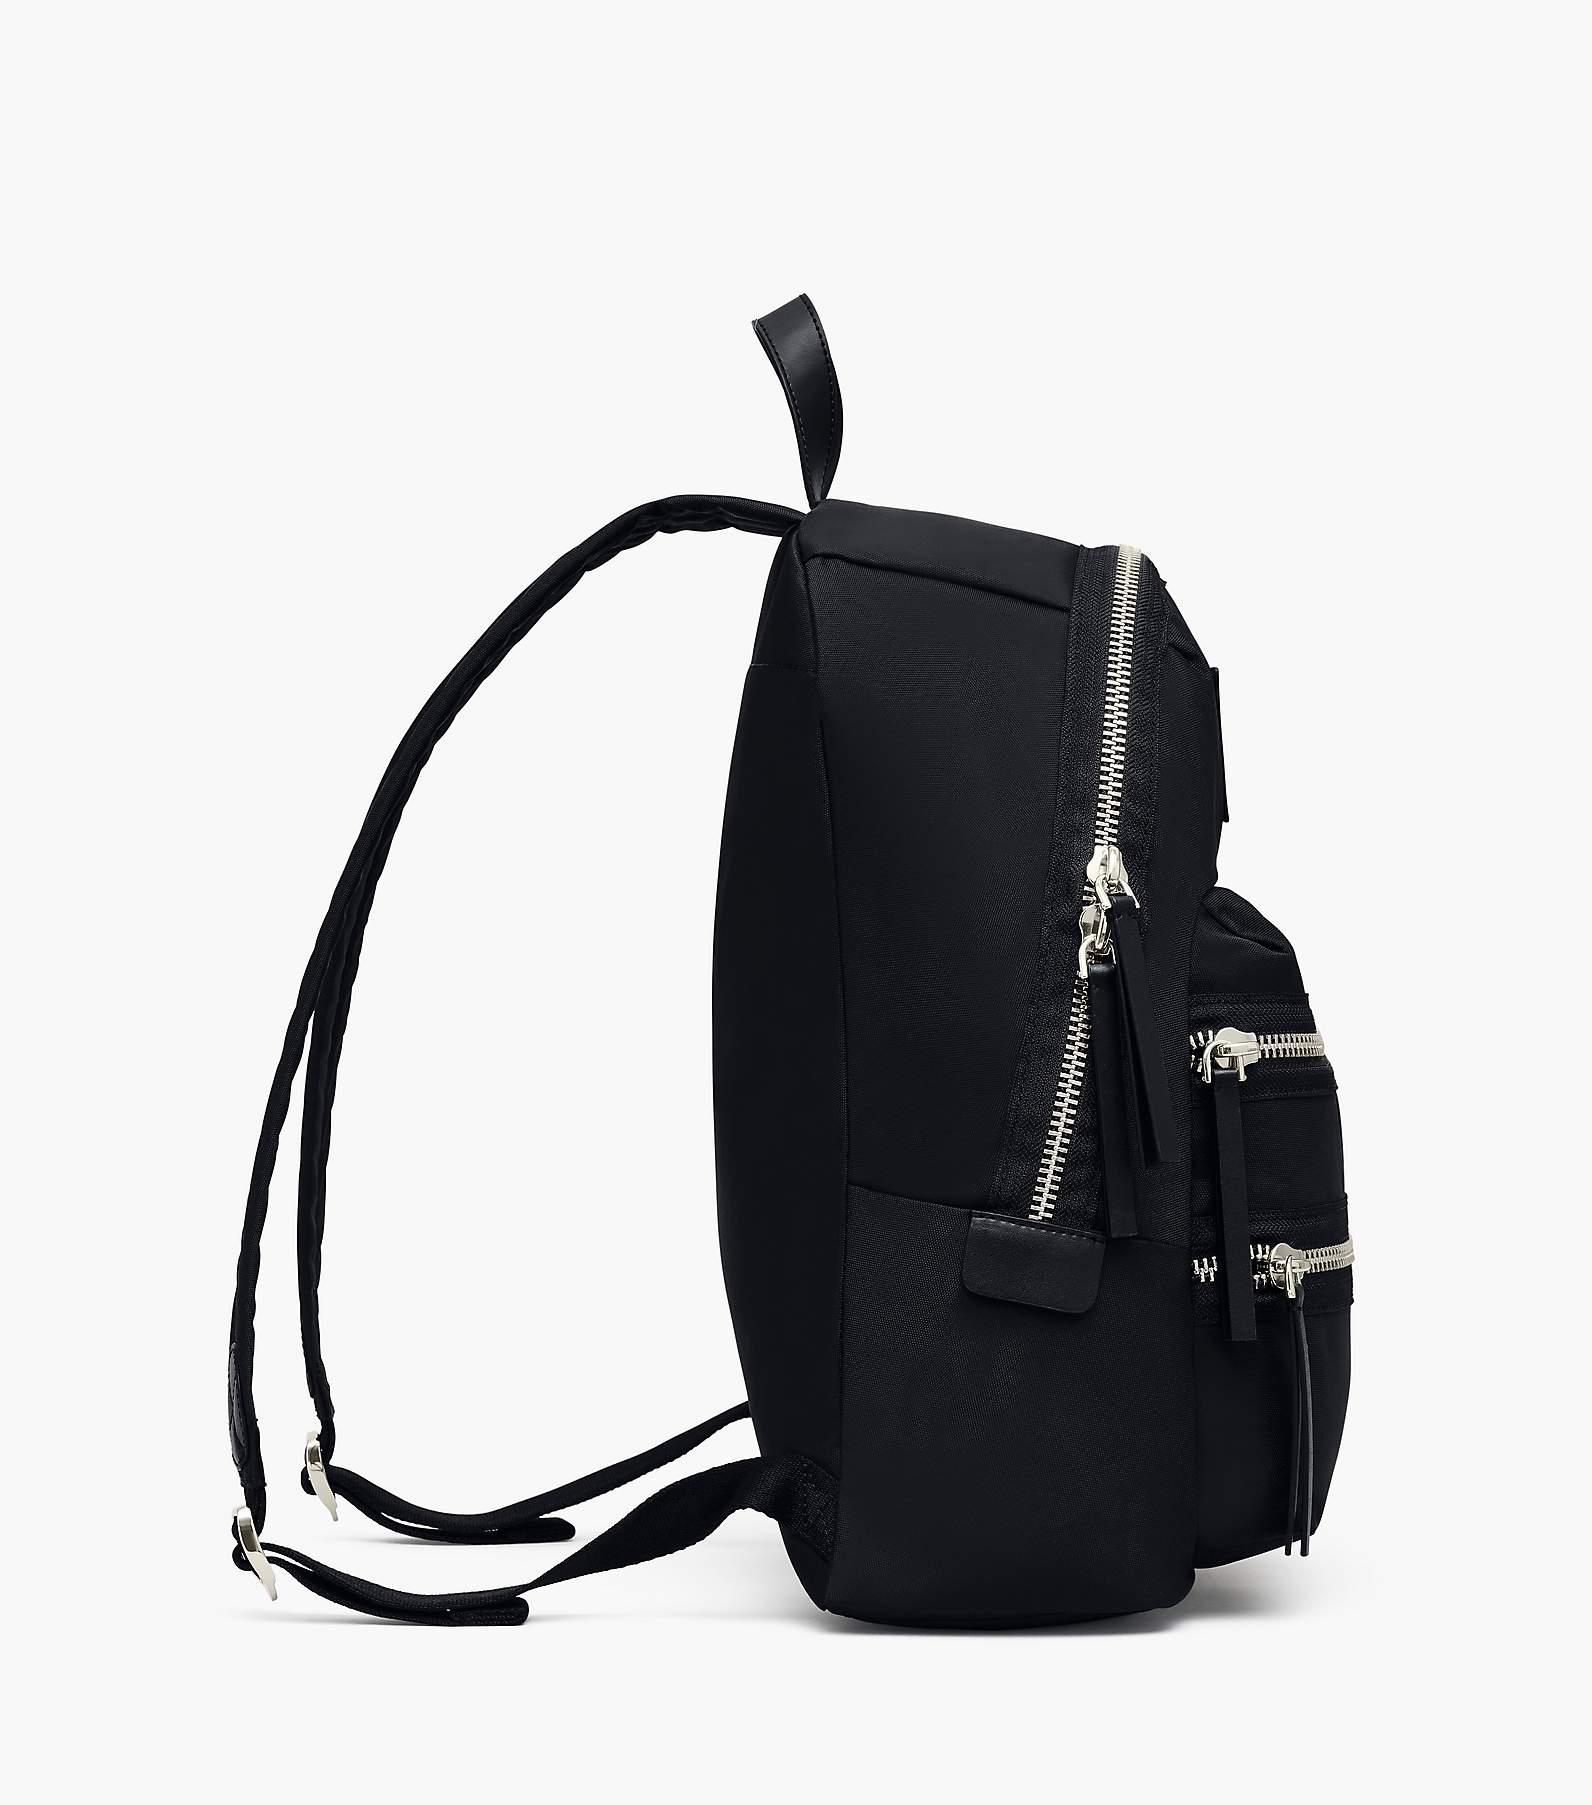 backpack silver